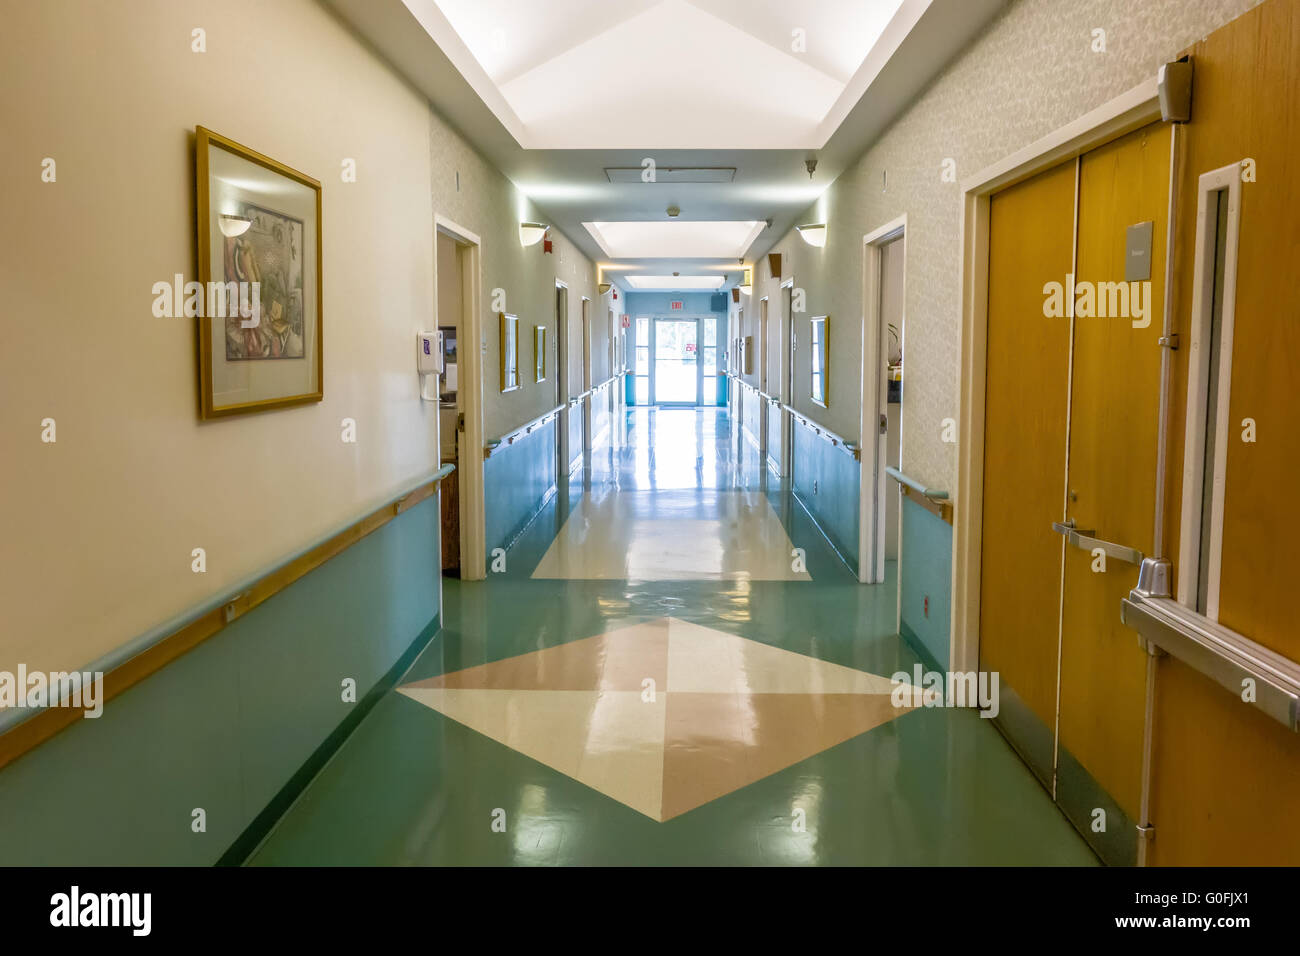 hospital hallway interior architecture and finishes in corridor Stock Photo